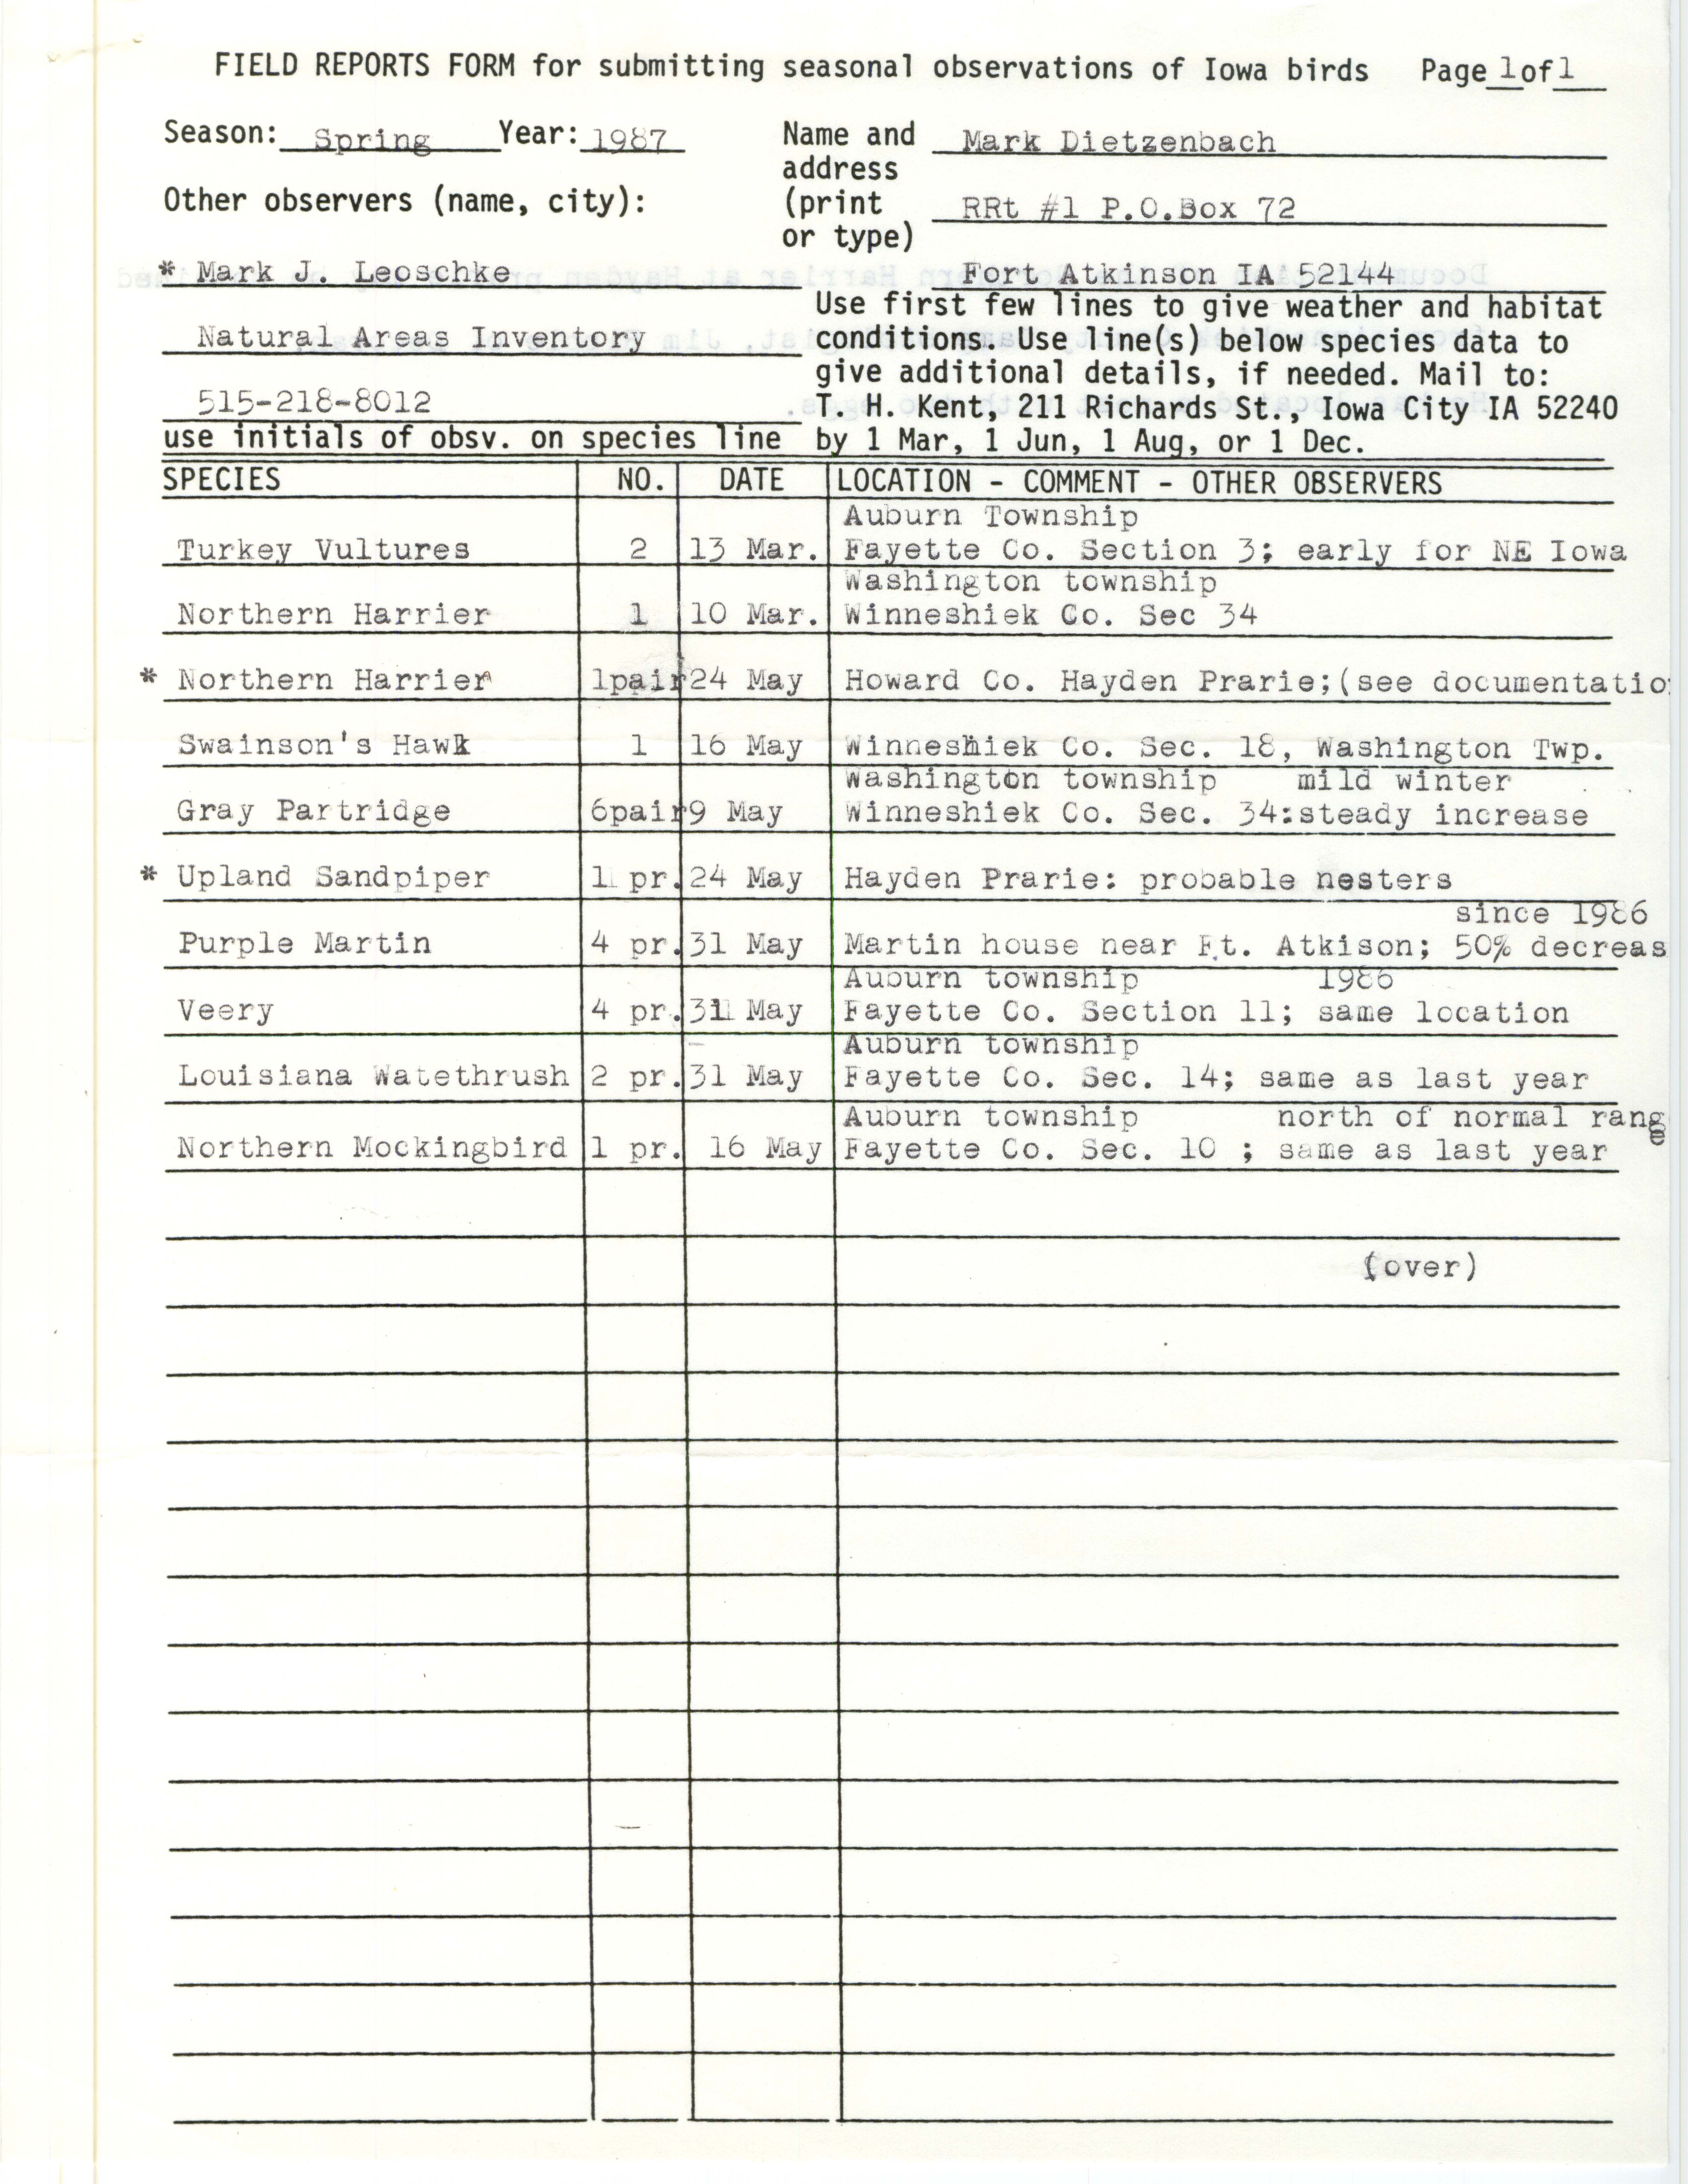 Field reports form for submitting seasonal observations of Iowa birds, Mark A. Dietzenbach, spring 1987